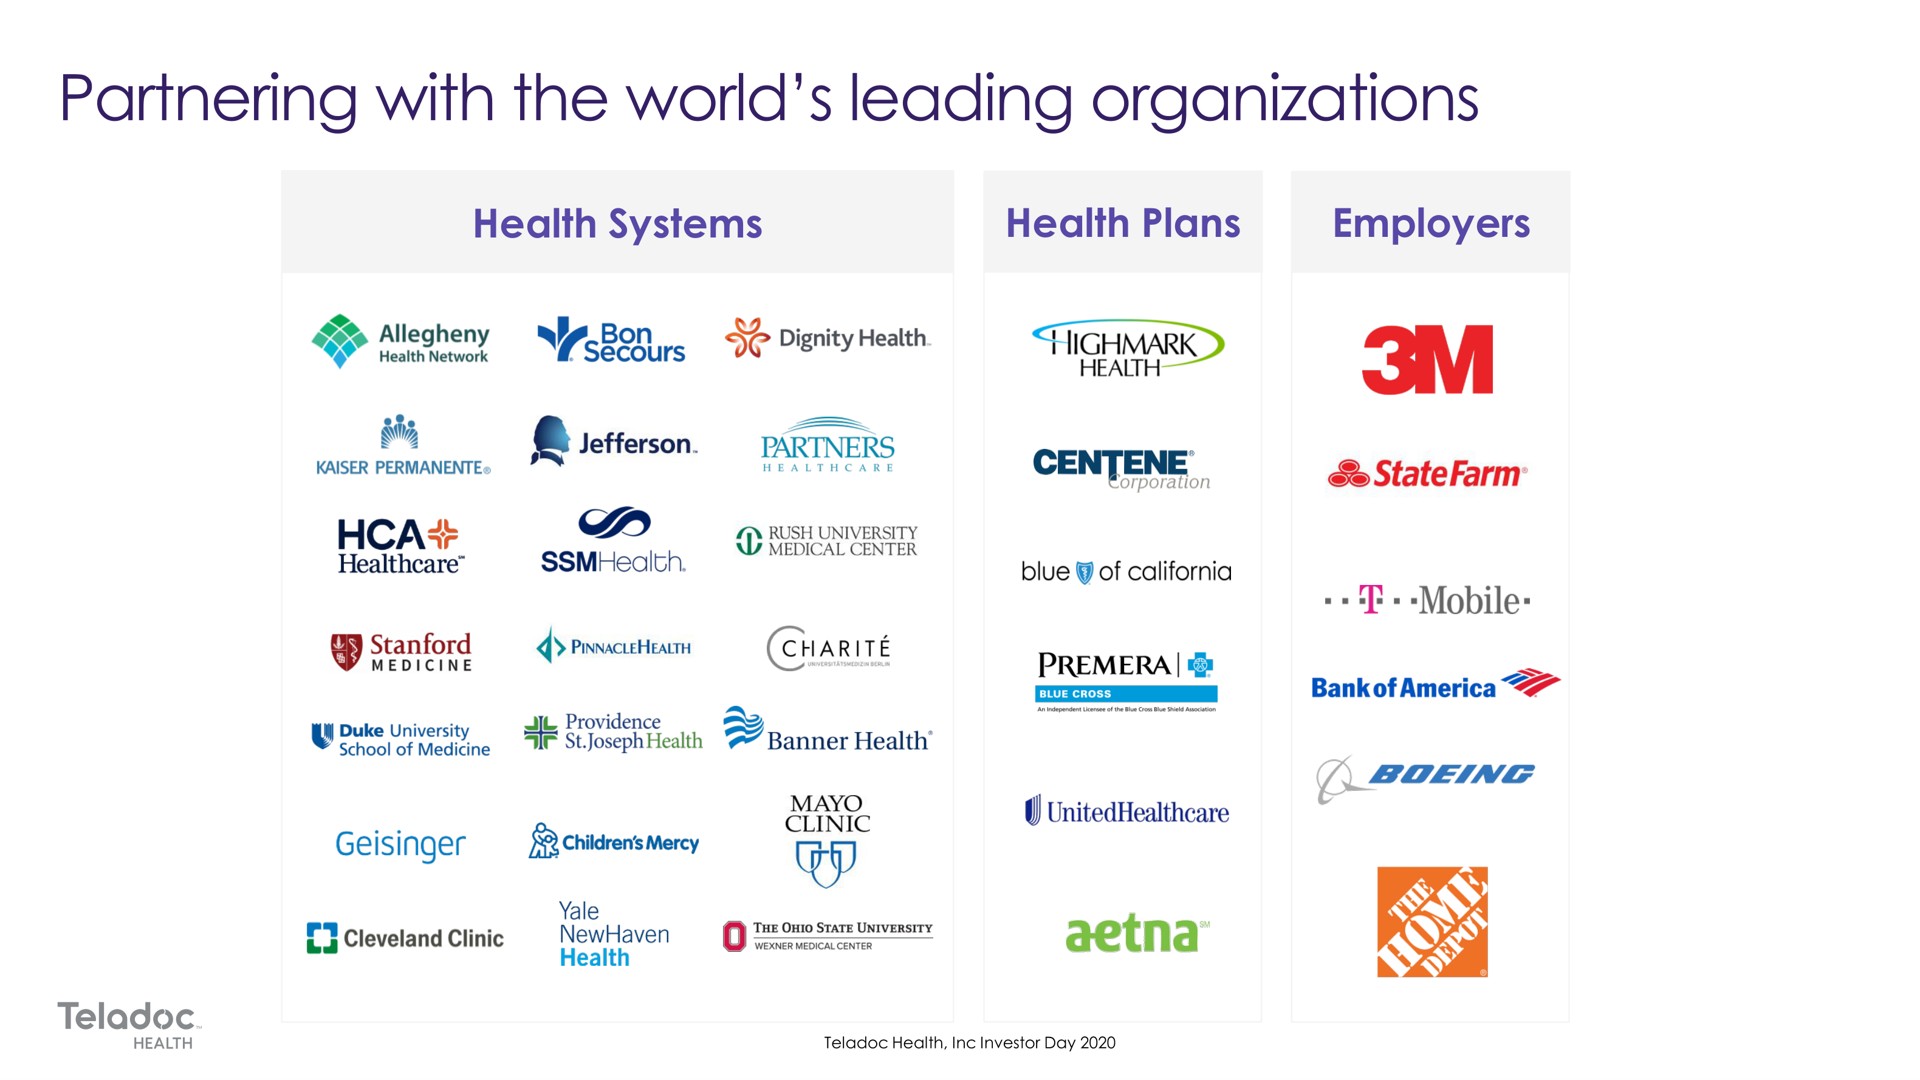 health systems health plans employers partnering with the world leading organizations ons | Teladoc